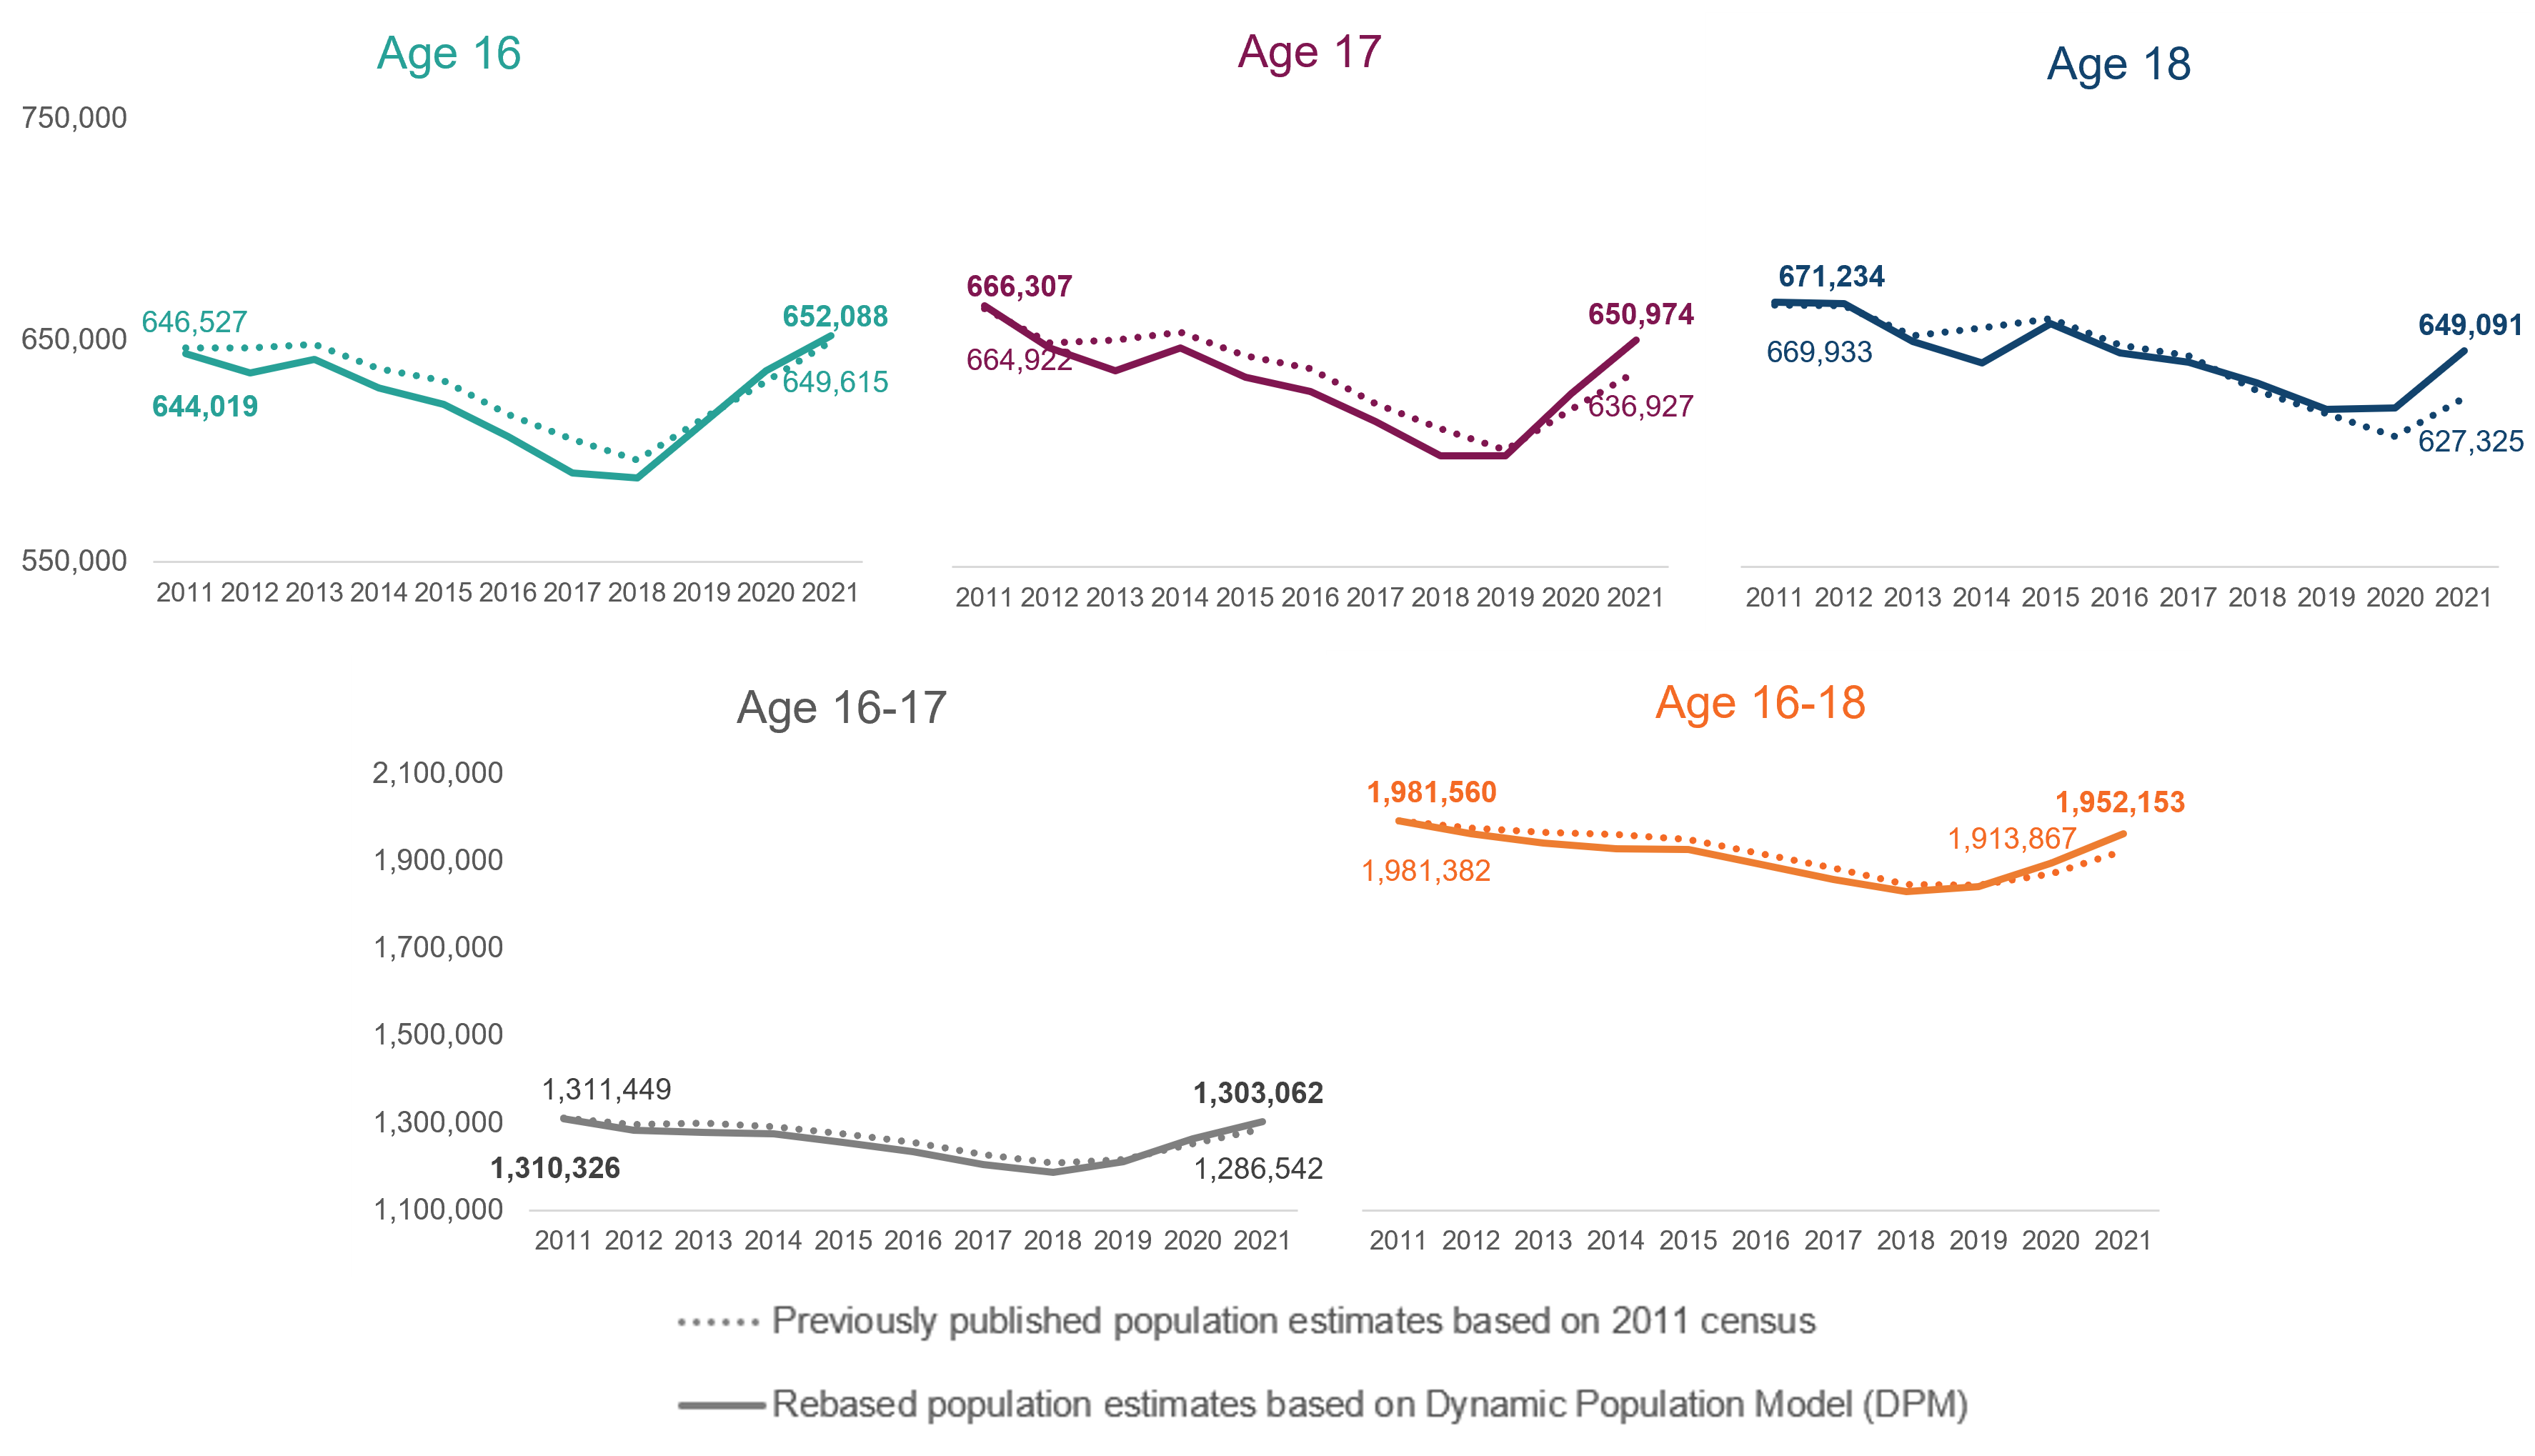 Comparison of previously published population estimates and the rebased estimates based on the DPM 2011-2021 for ages 16,17,18, 16-17 and 16-18.